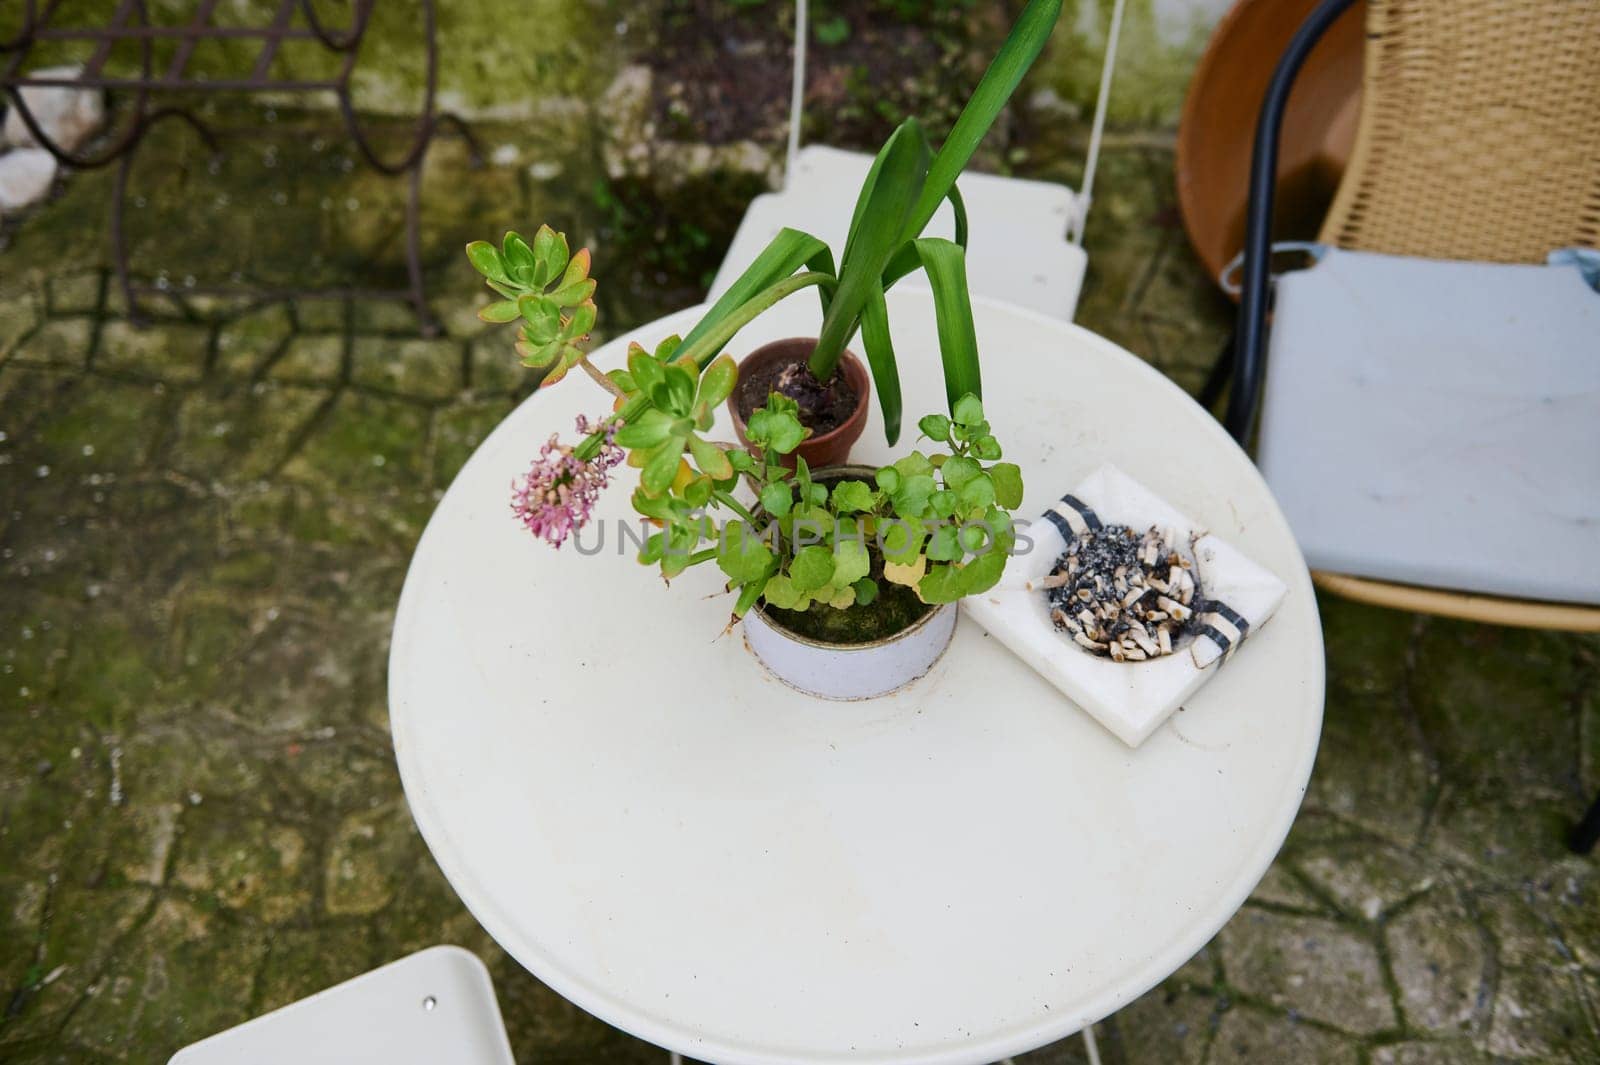 View from above of a white table with chair in the garden. Ashtray with cigarette butts on the table. The concept of lung diseases. Lung cancer awareness campaign